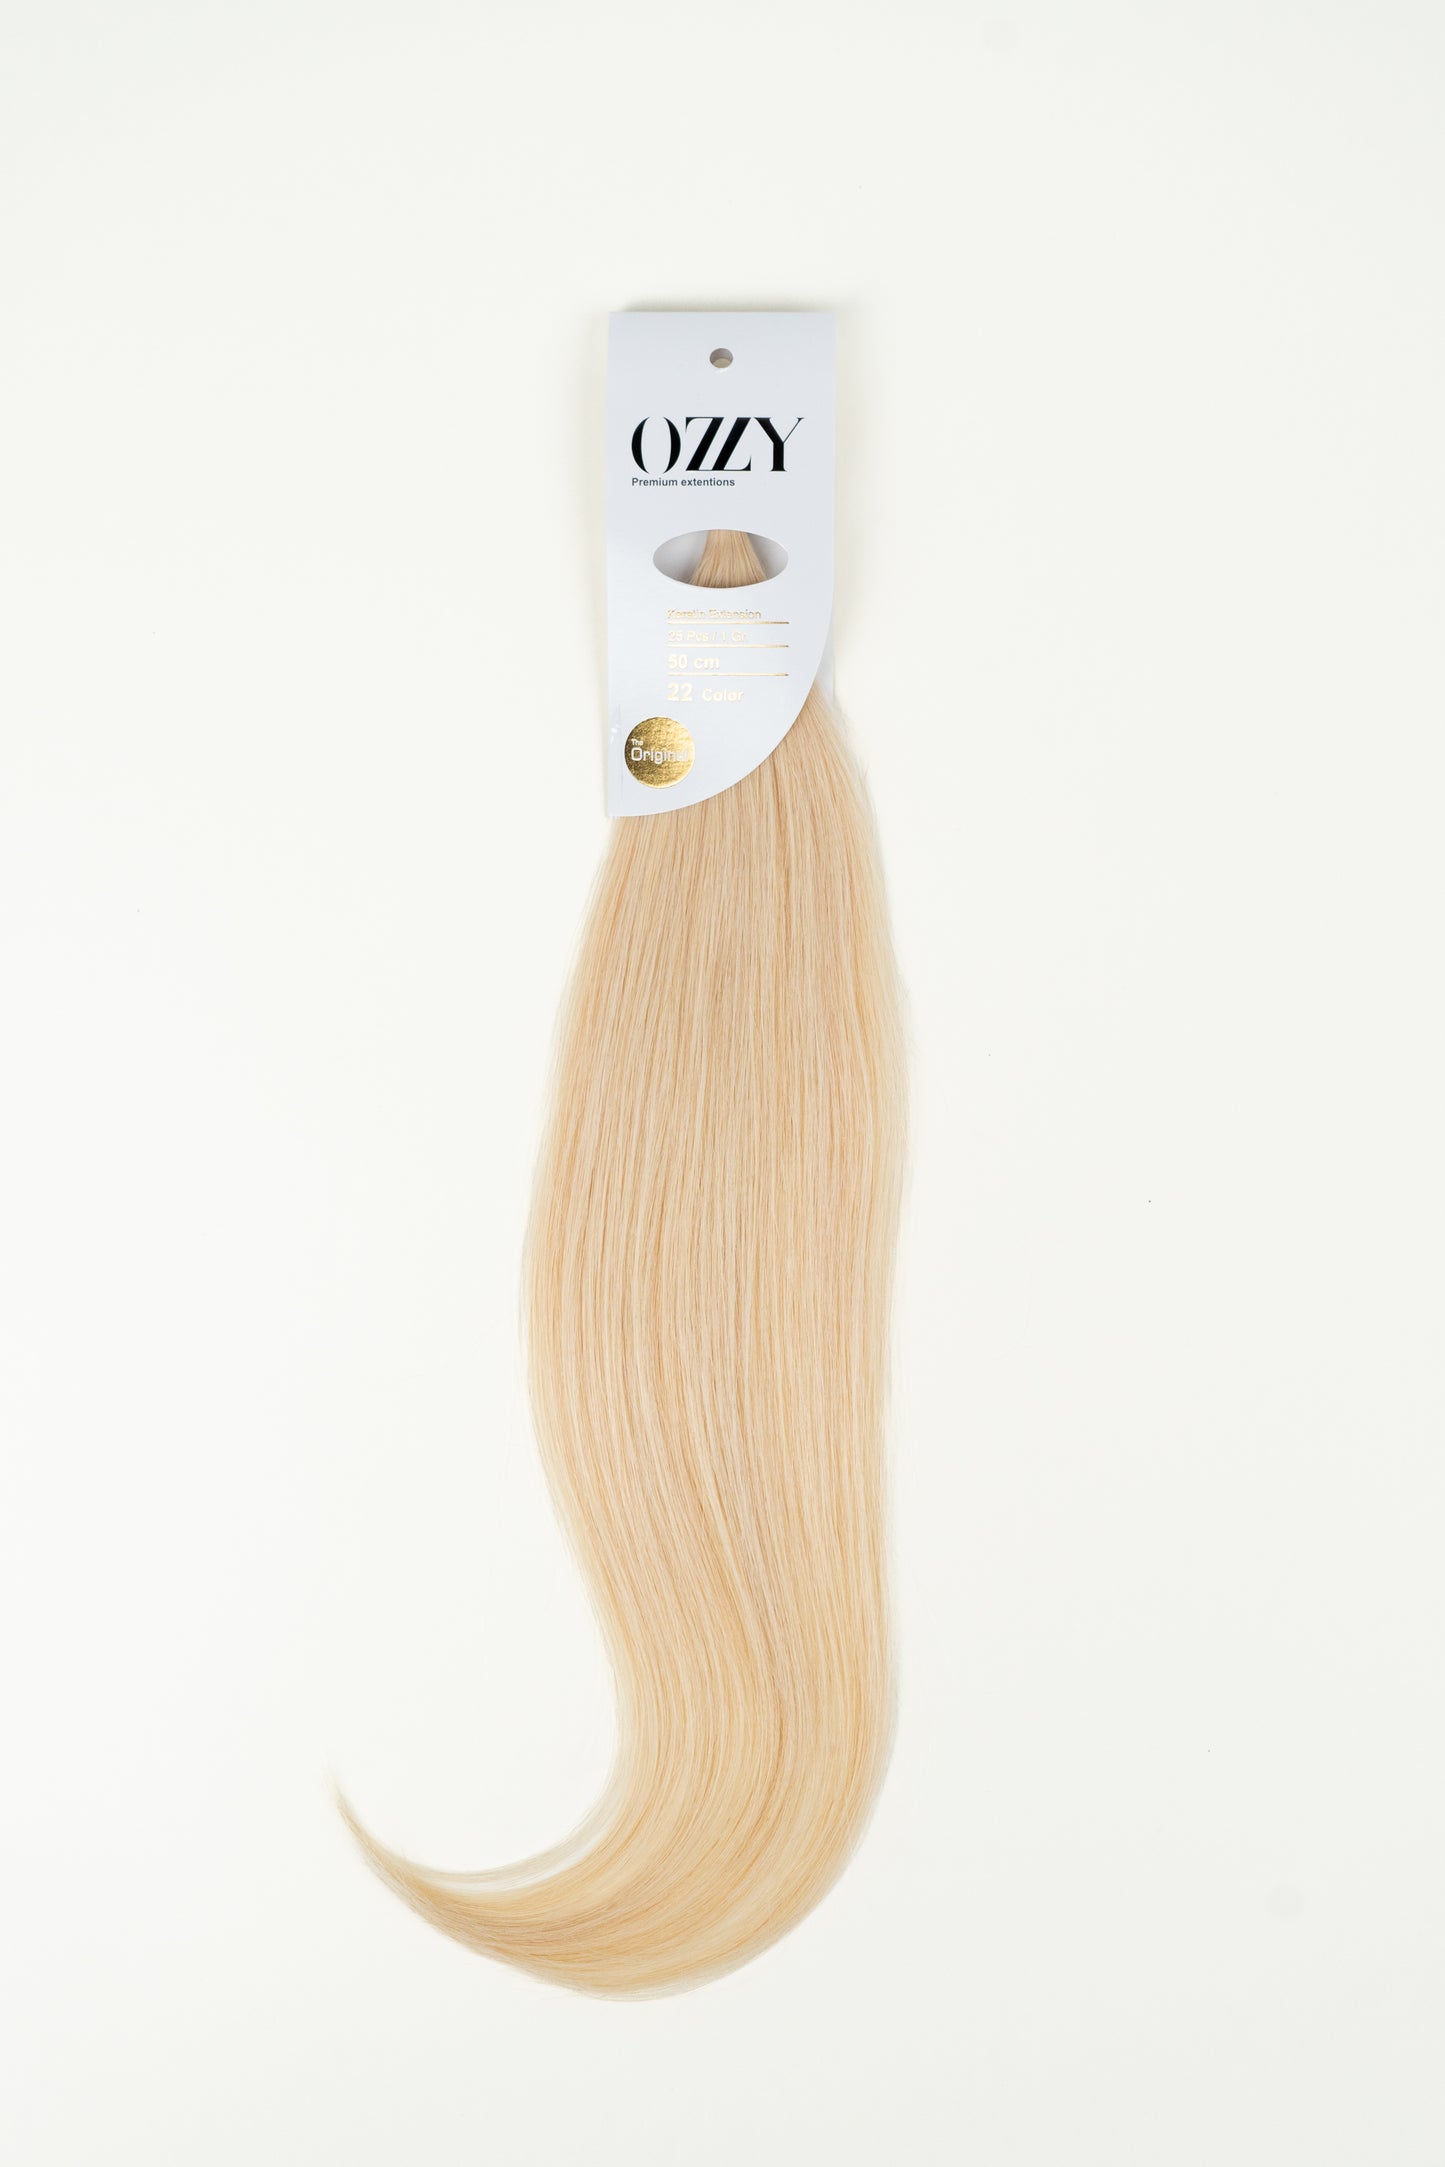 Keratin Extension #22 by Ozzy